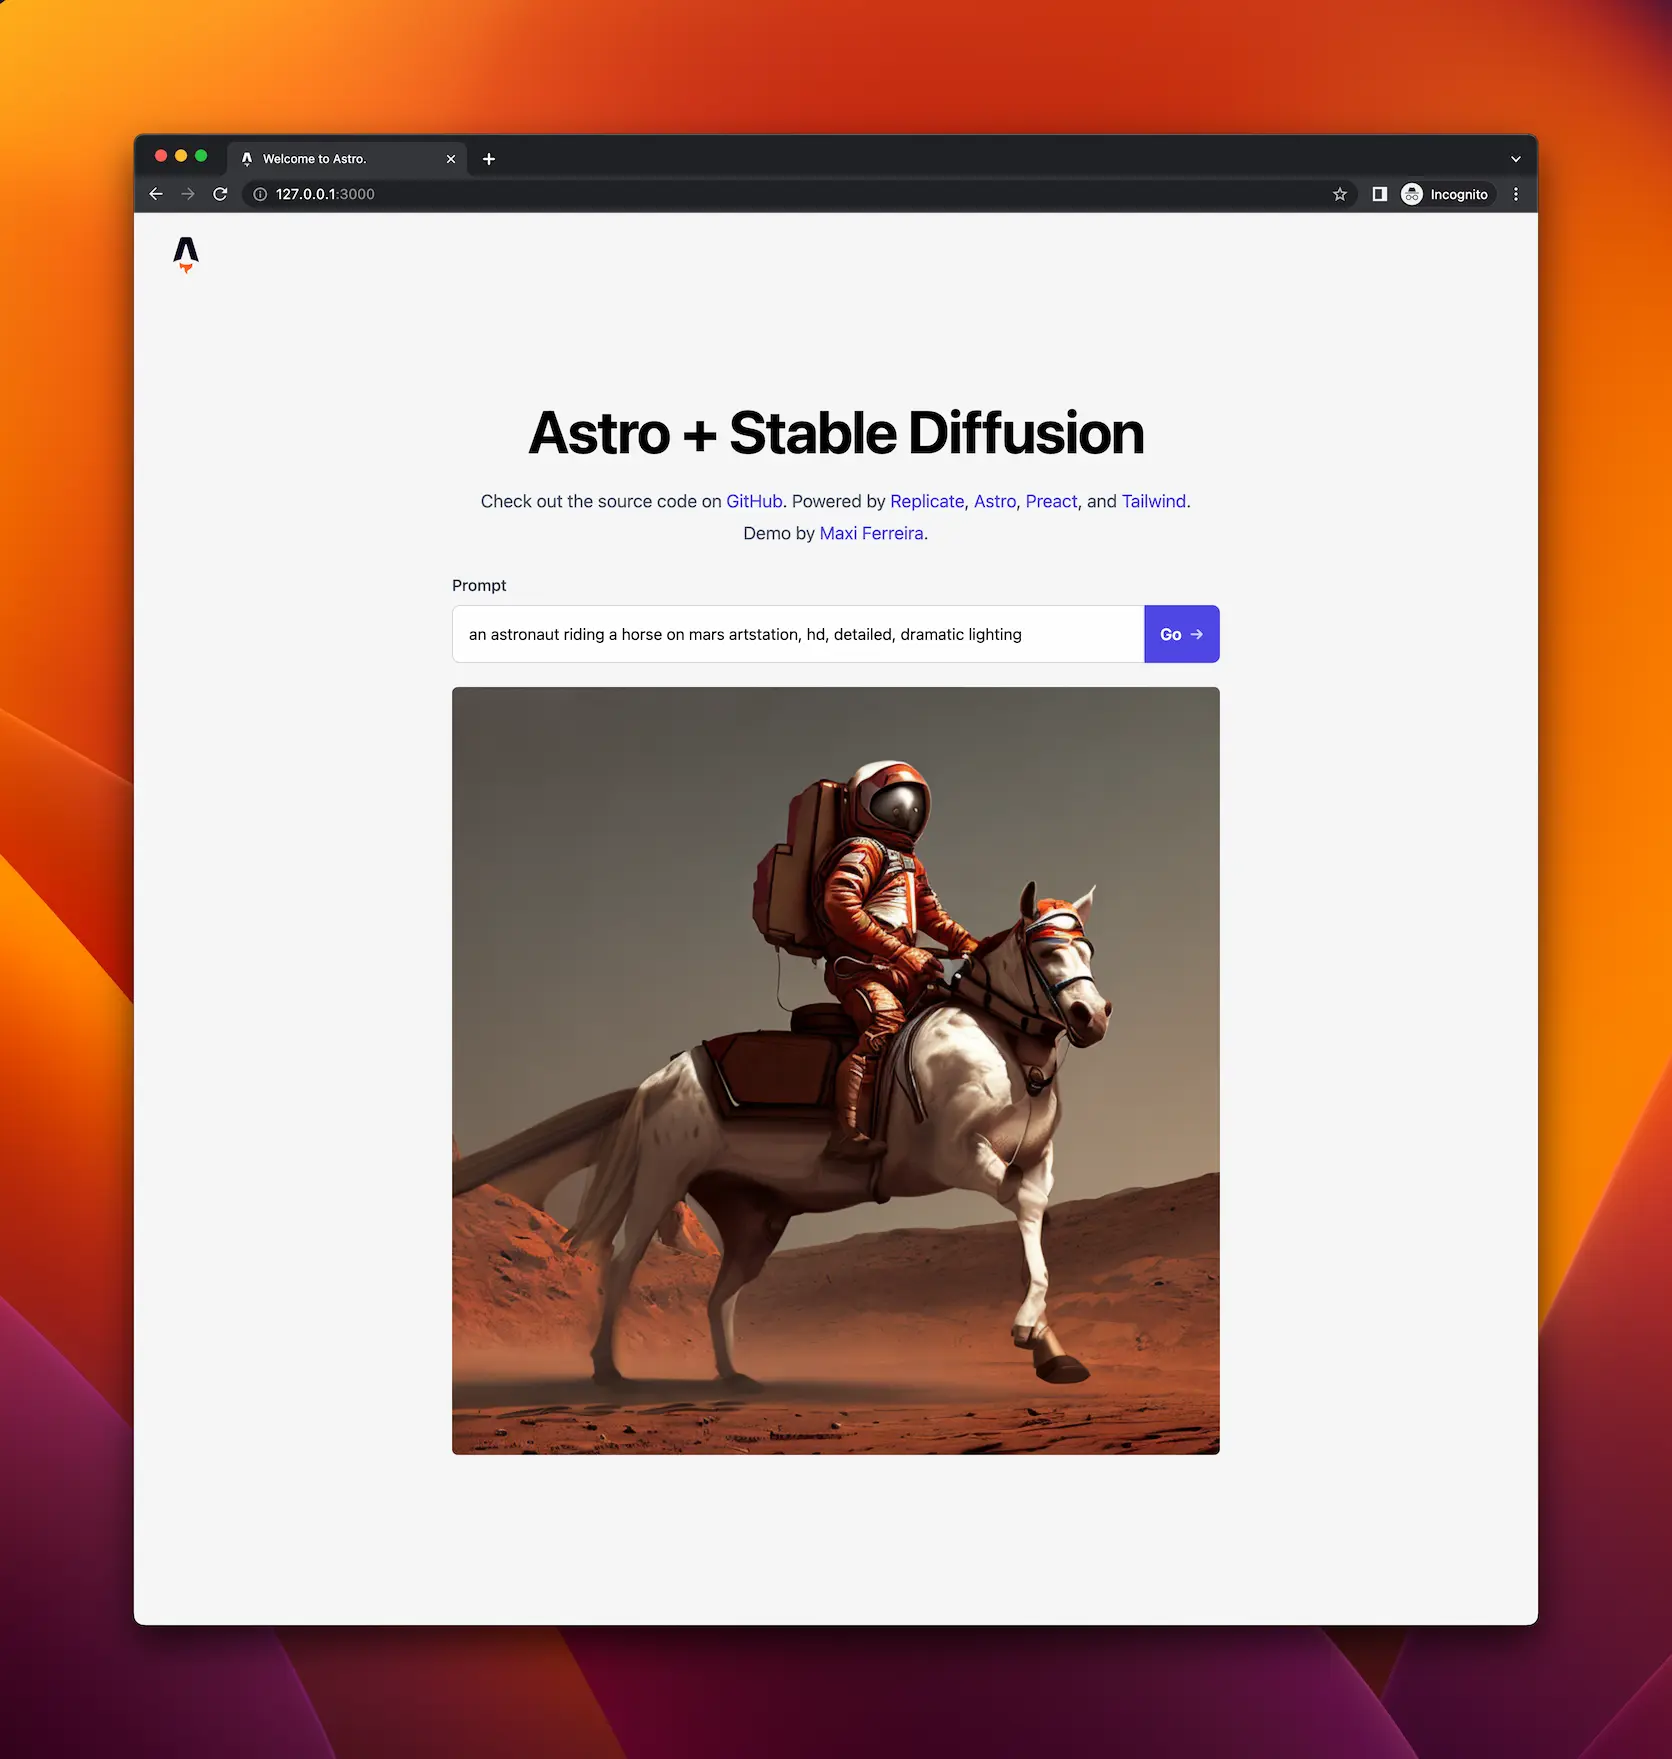 A screenshot of a web client for the stable diffusion model, showing an AI-generated image of an astronaut riding a horse on Mars.